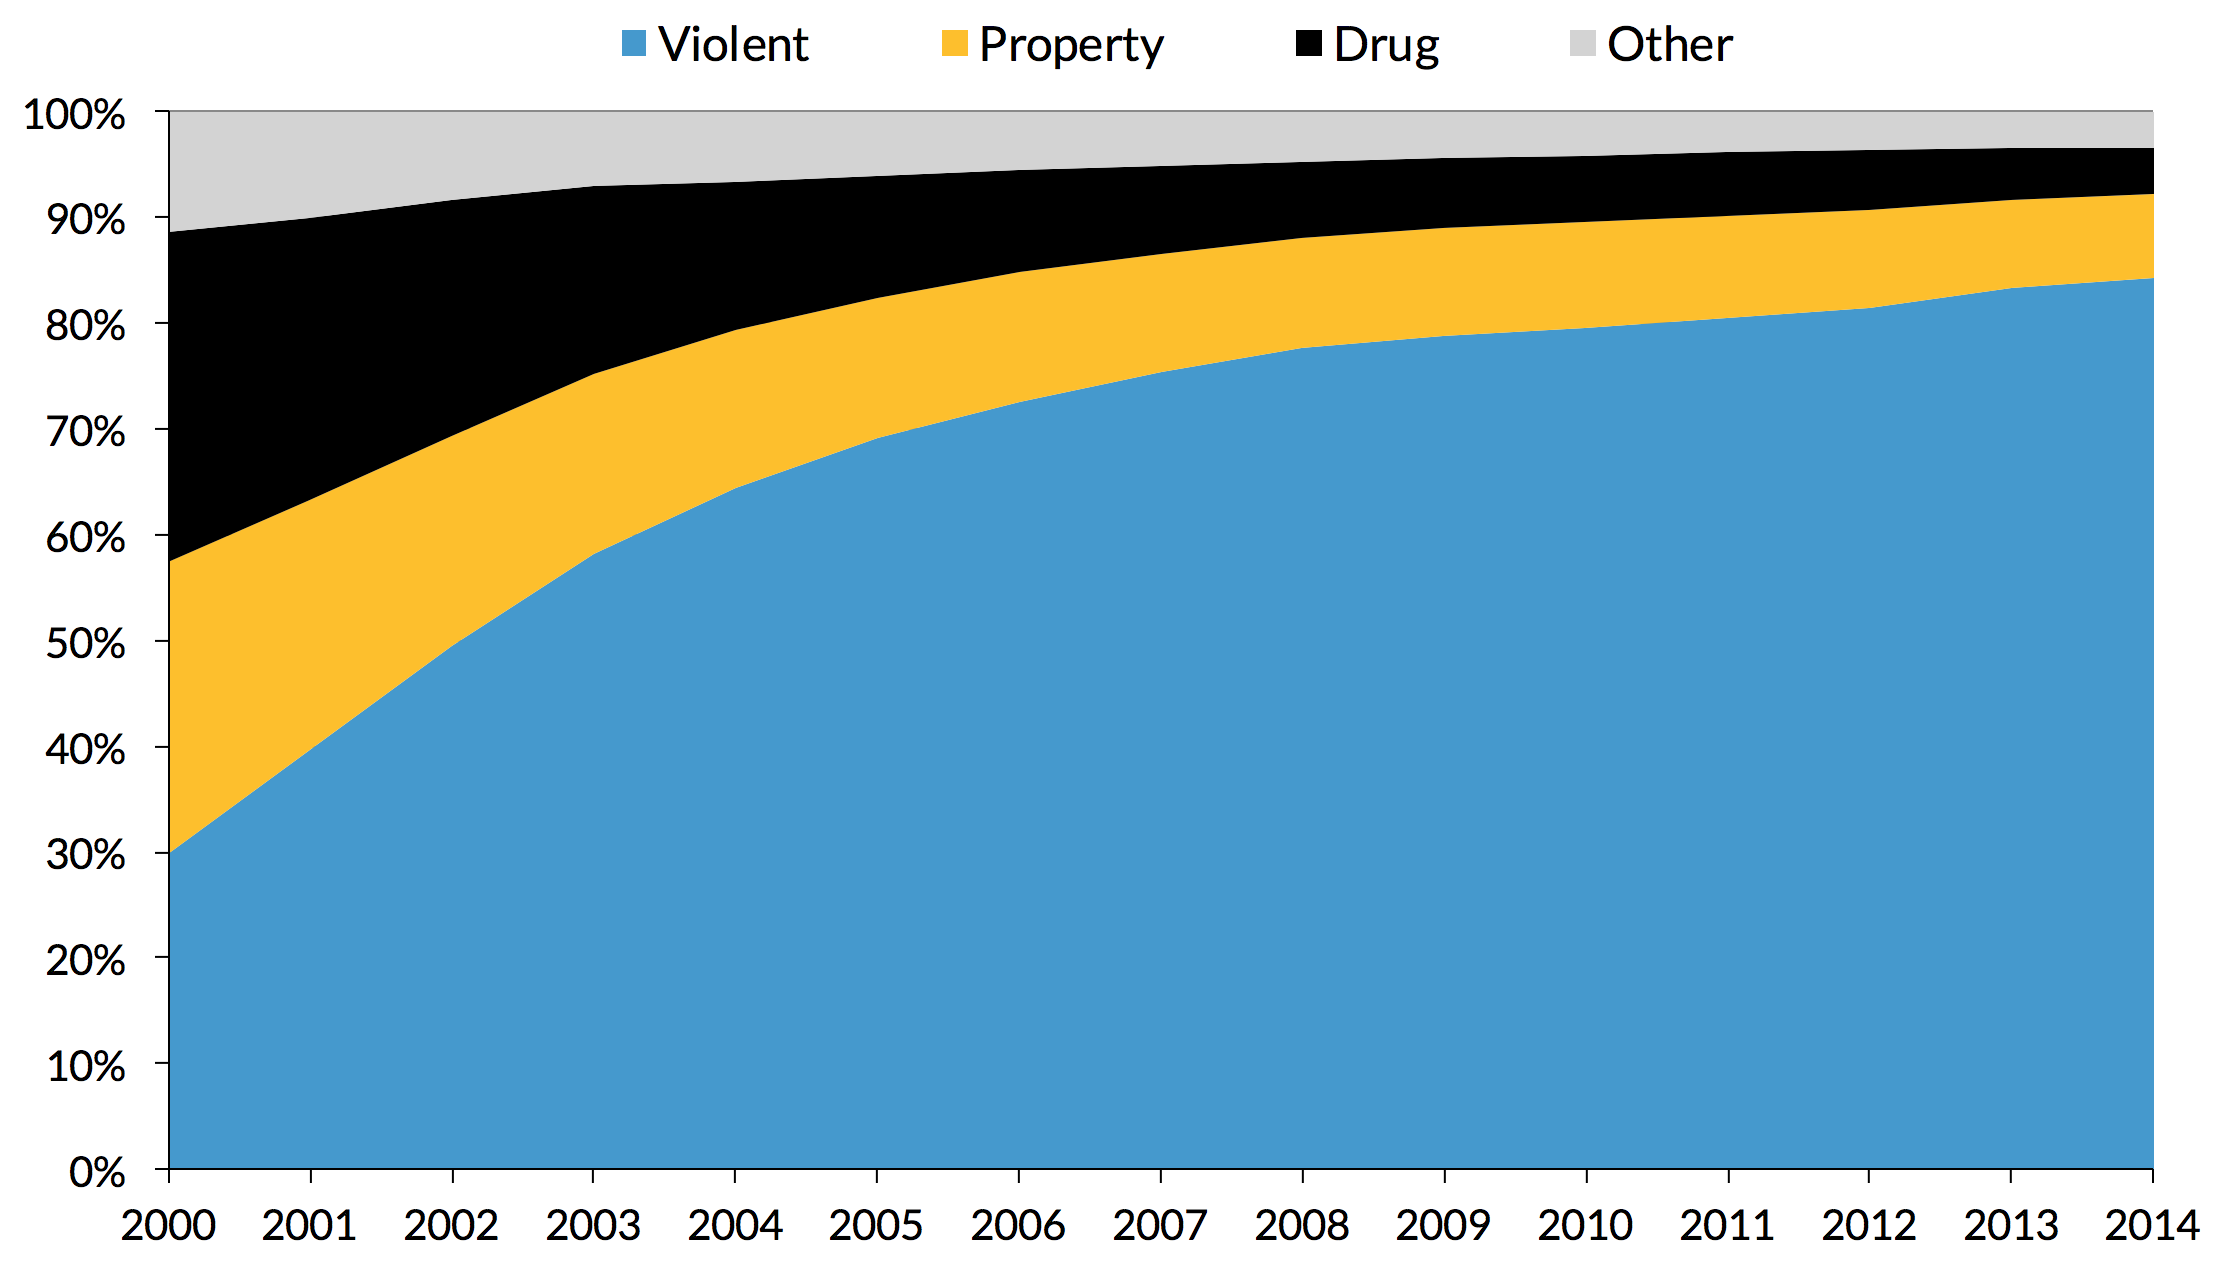 A stacked area chart, showing the percent breakdown by offense type (violent, property, drug, and other) of the 2000 admission cohort of people in prison, for 17 states reporting data between 2000 and 2014. In 2000, 62,881 of the cohort were in prison for violent offenses, 58,034 for property offenses, 65,991 for drug offenses, and 23,931 for other offenses. By 2014, of the people admitted in 2000 who were still incarcerated, 6,036 were incarcerated for violent offenses, 566 for property offenses, 319 for drug offenses, and 247 for other offenses.